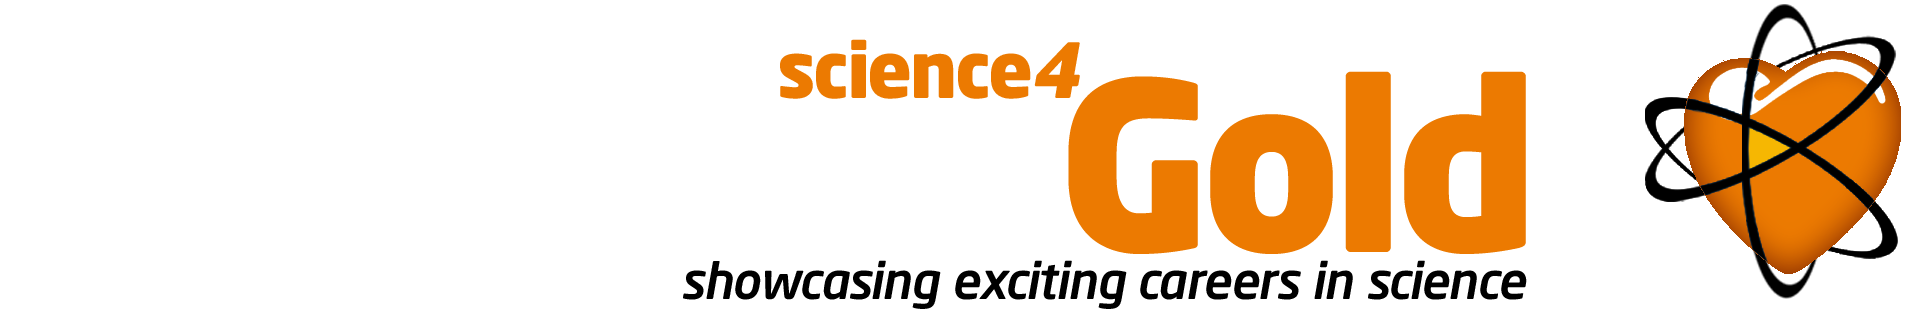 Science for Gold - showcasing exciting careers in science